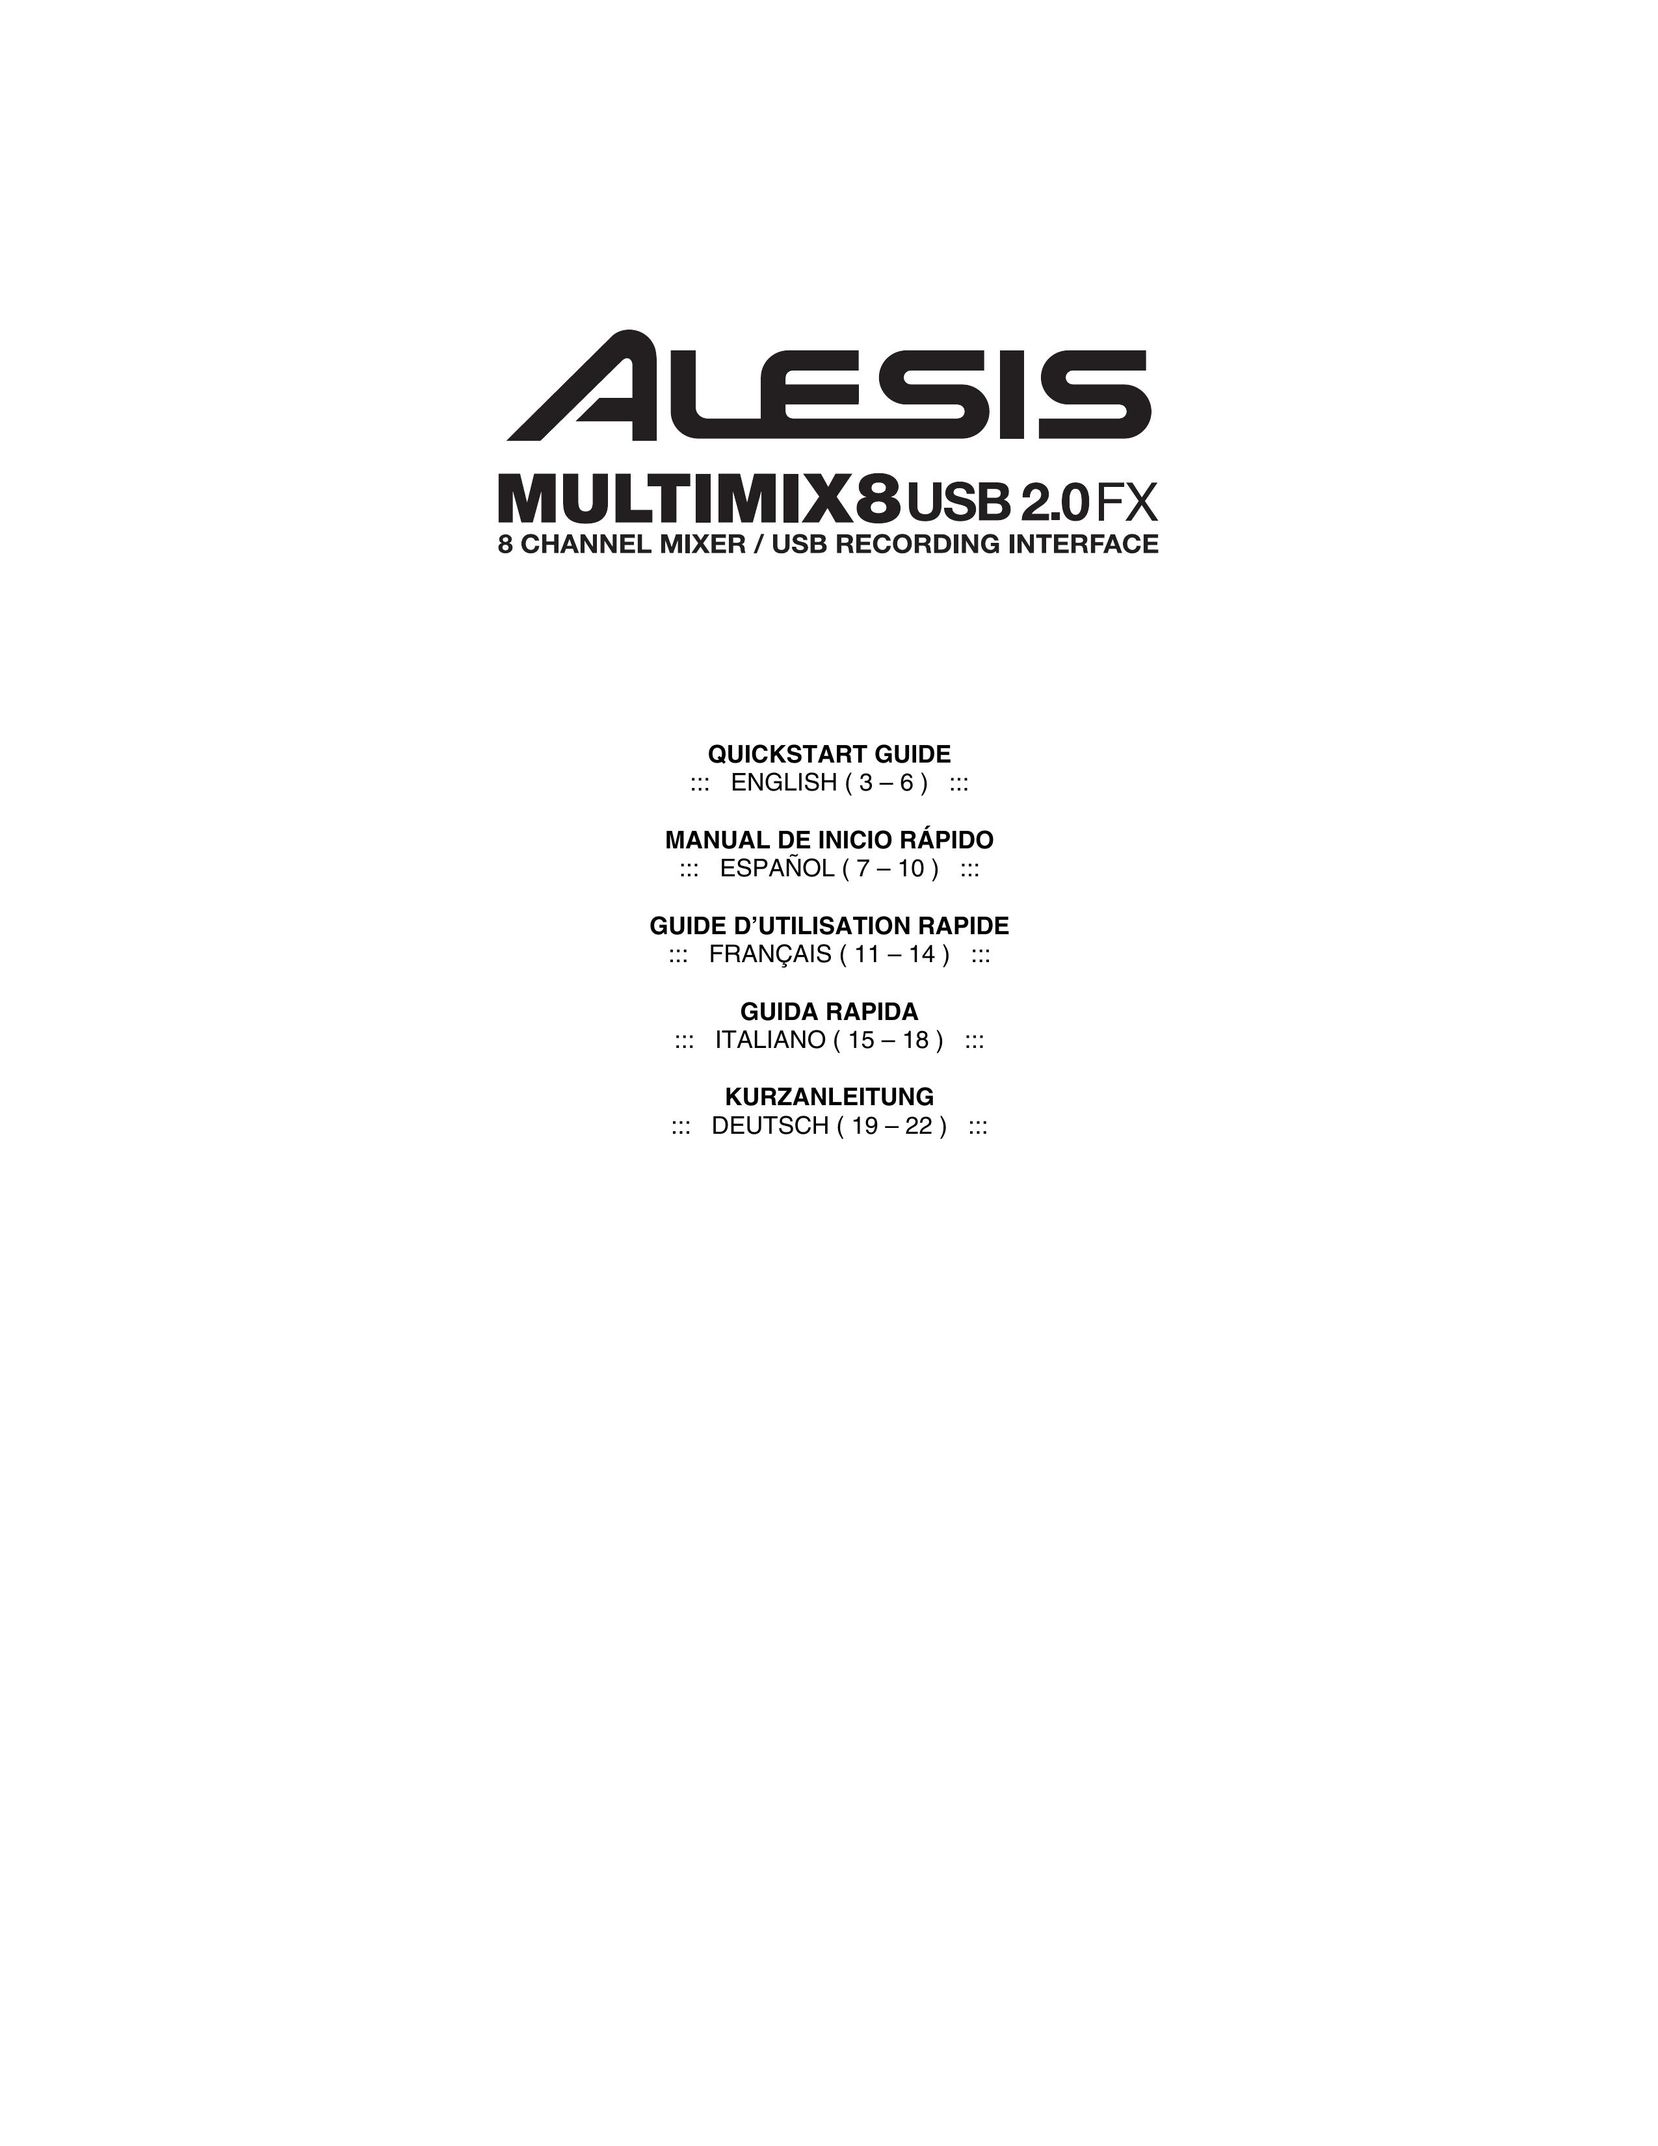 Alesis 7-51-0339-A Computer Drive User Manual (Page 1)